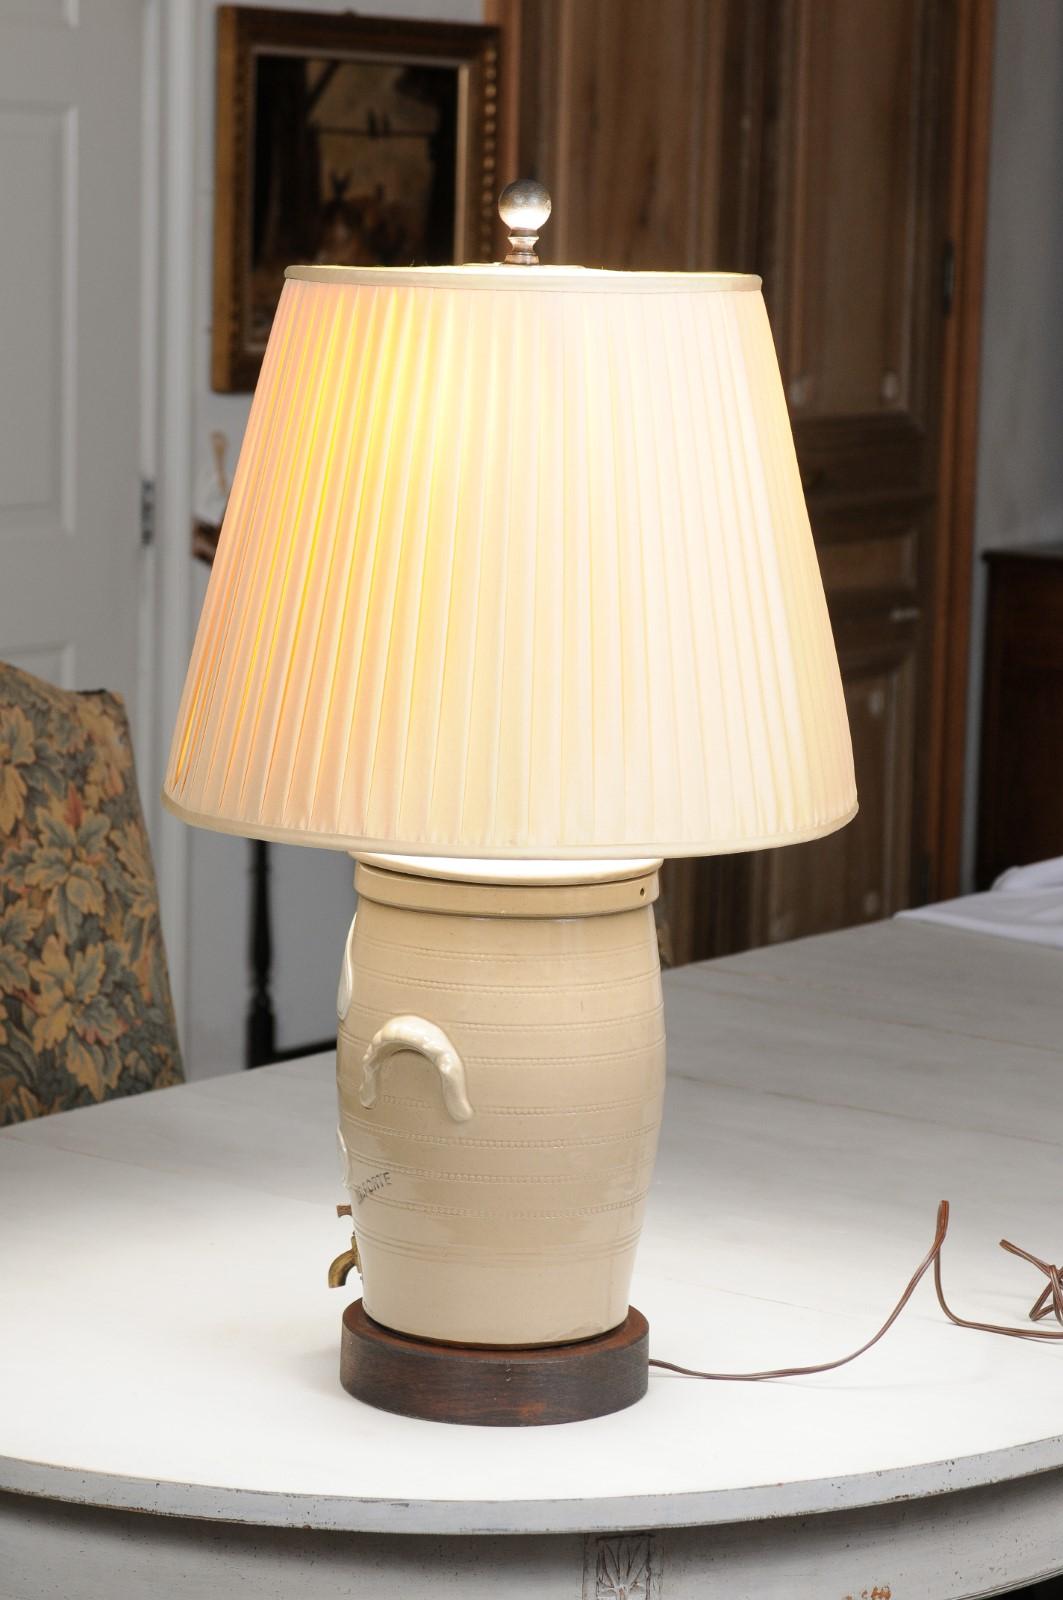 A French stoneware spirit barrel from the 19th century made into a table lamp with shade, mounted on a circular wooden base. Created in France during the 19th century, this spirit barrel was produced by a British company located on the Rue de Rivoli